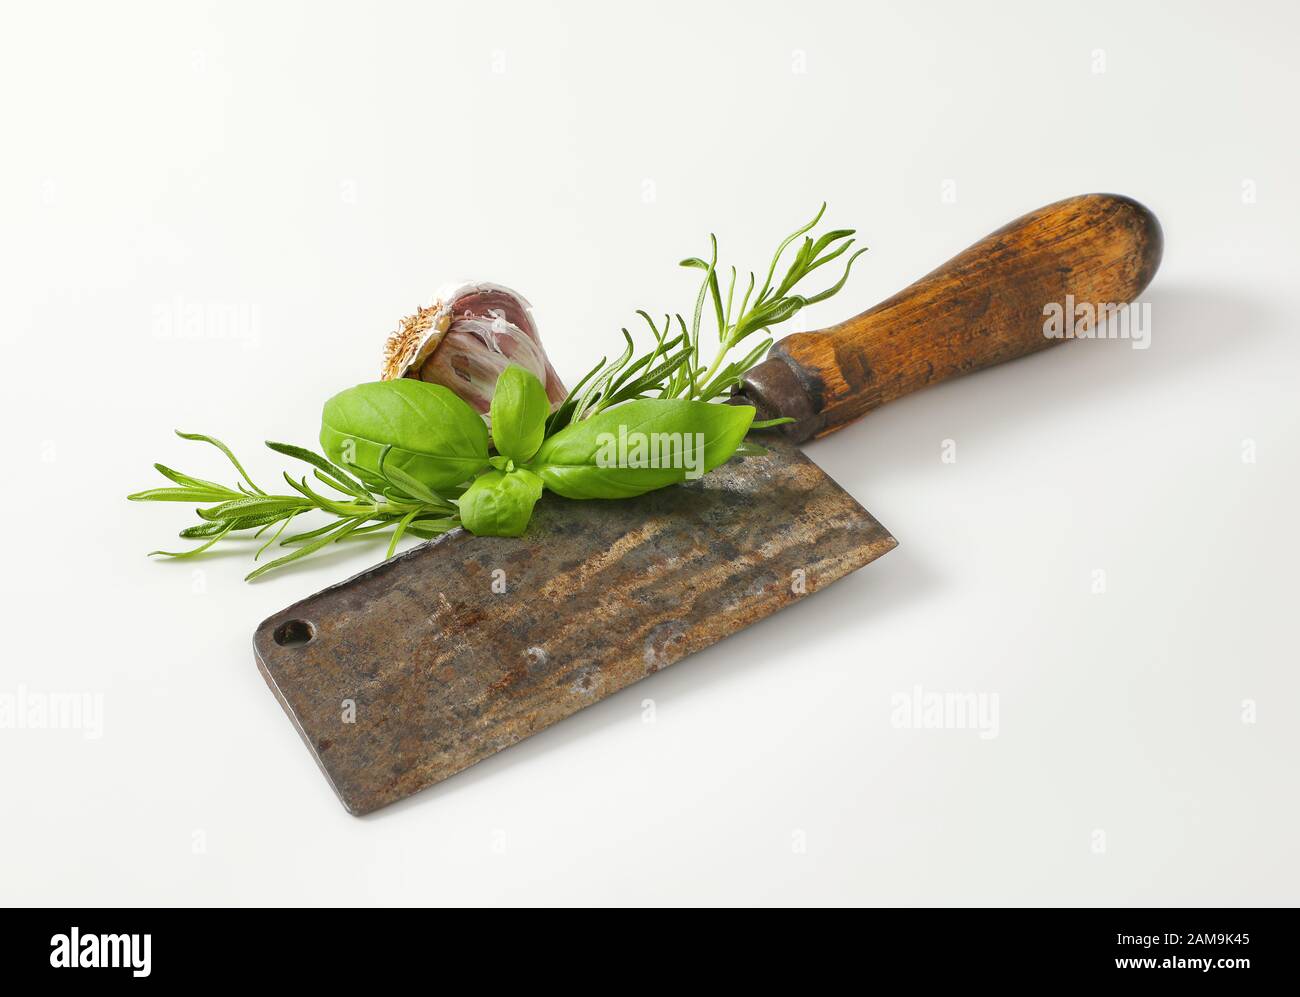 https://c8.alamy.com/comp/2AM9K45/old-rusty-meat-cleaver-knife-with-fresh-basil-and-rosemary-2AM9K45.jpg